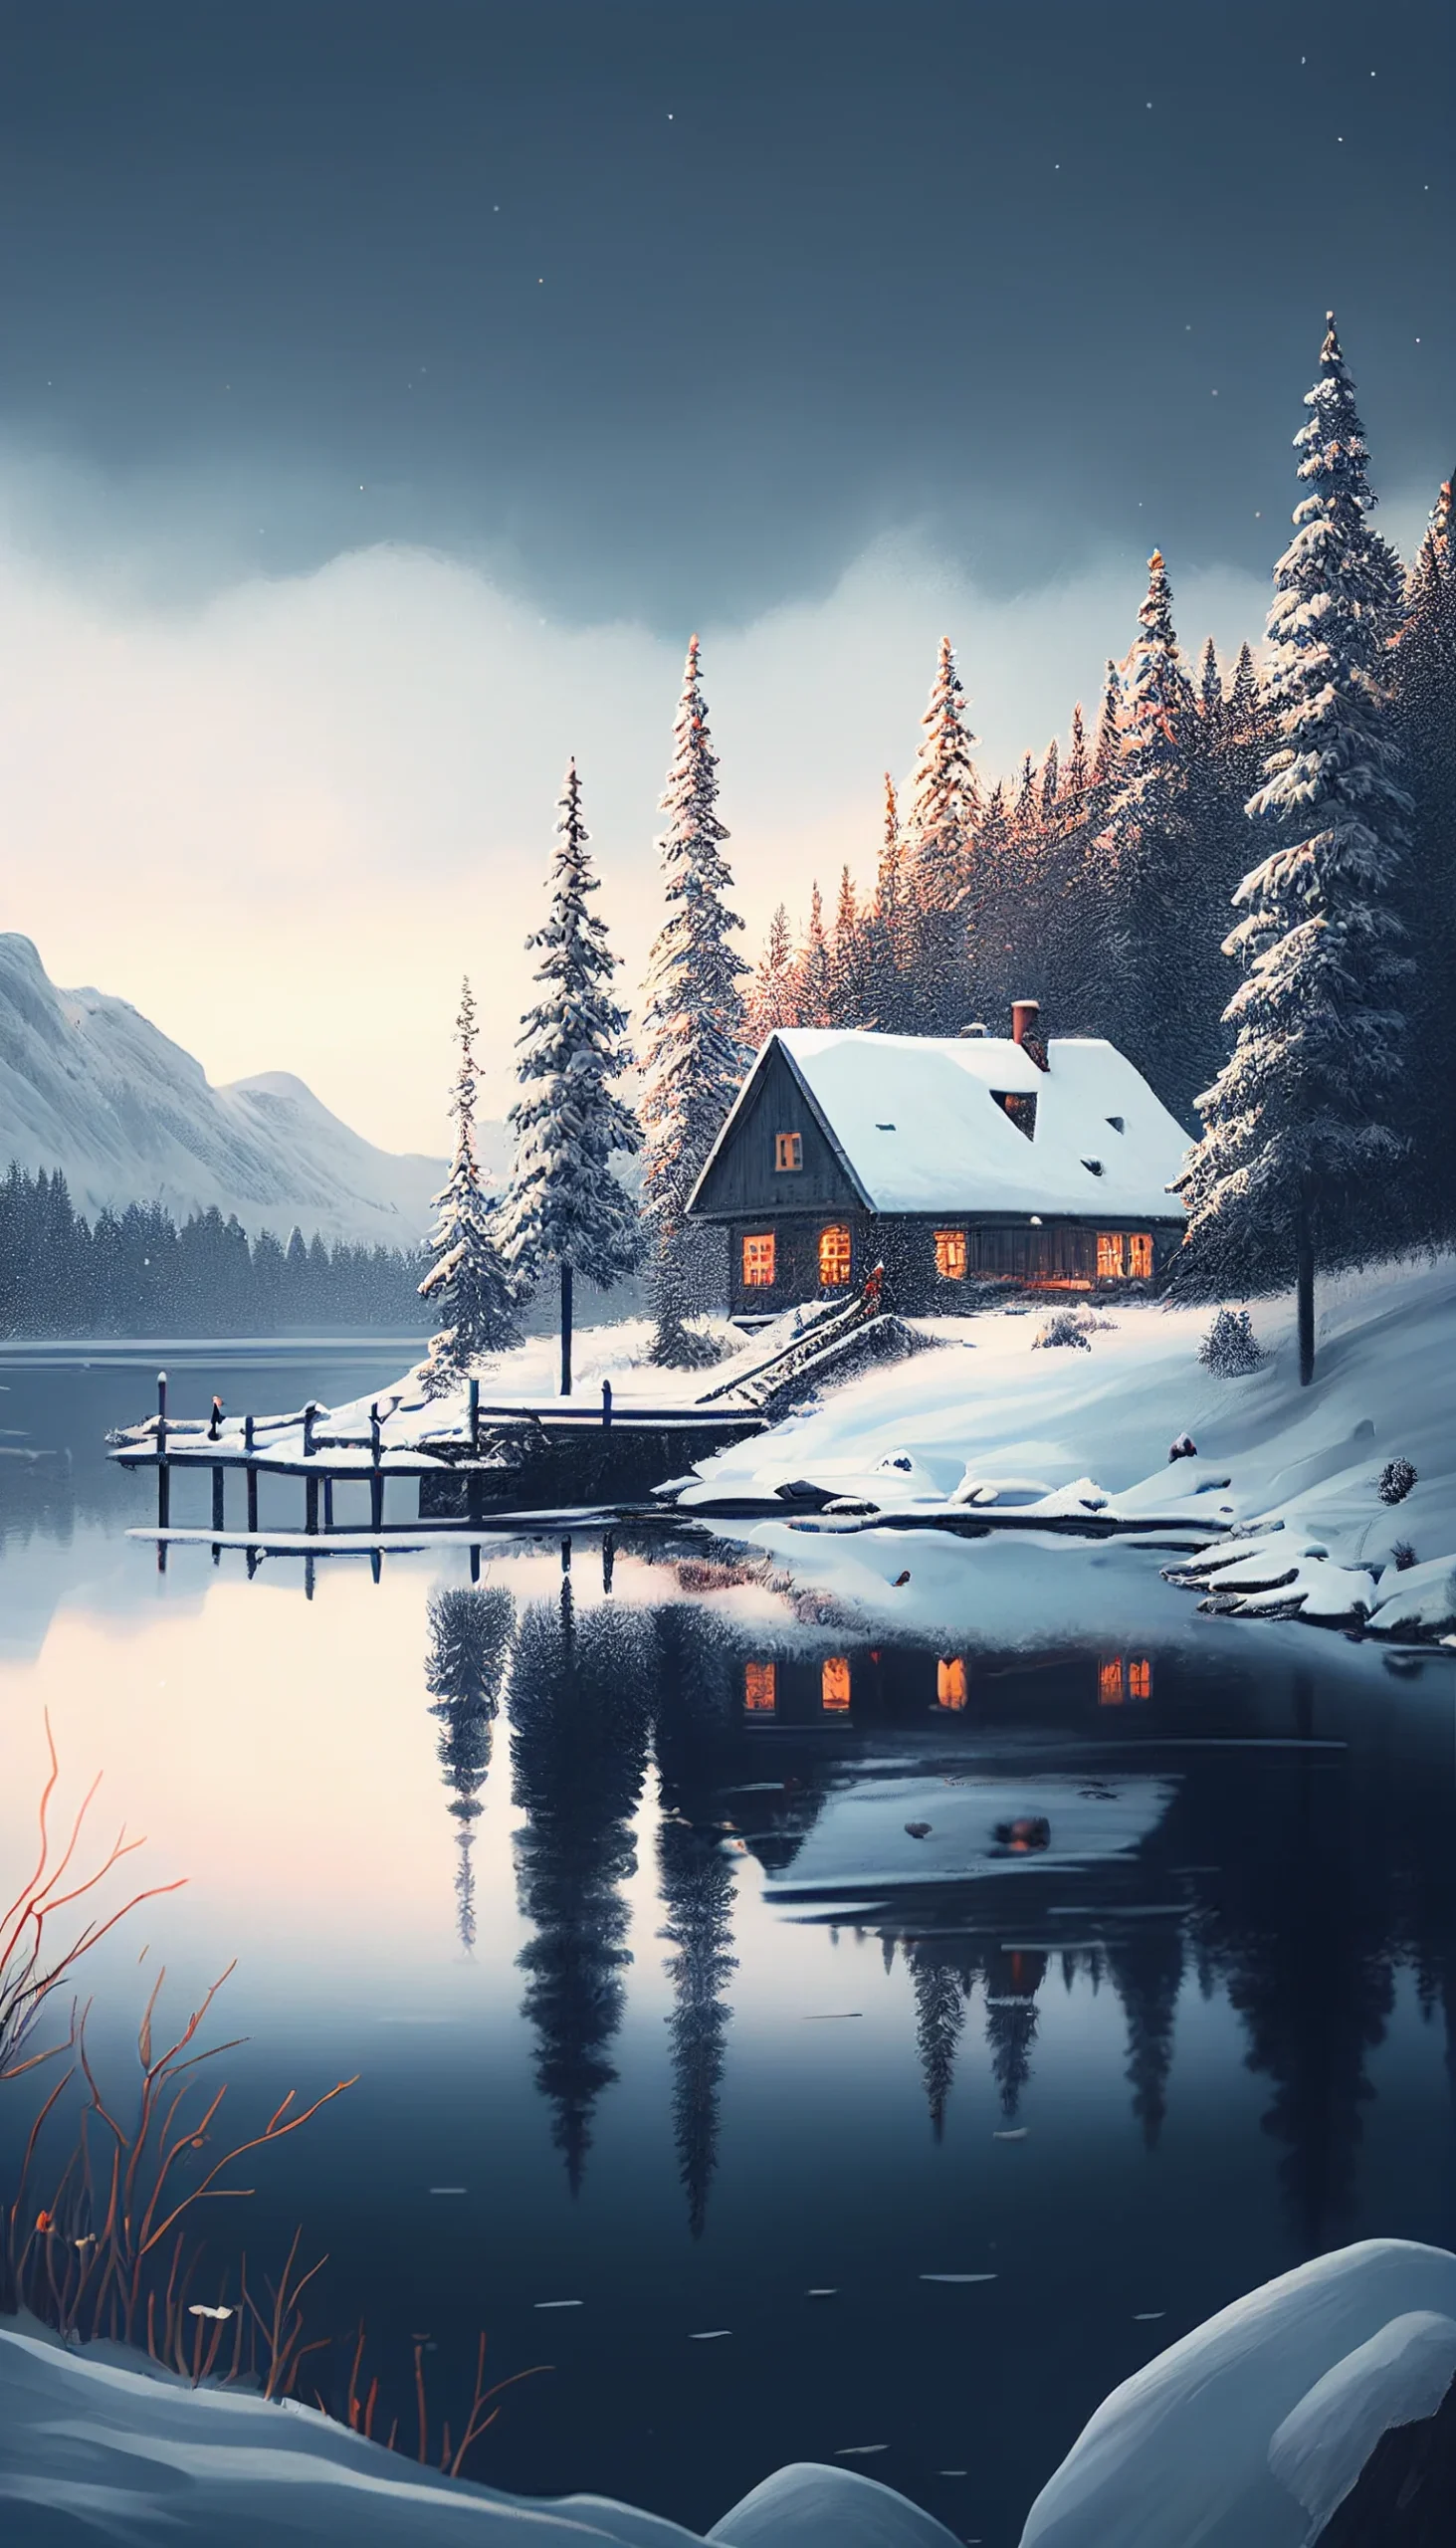 A cozy cabin in the woods by a lake - Lake, winter